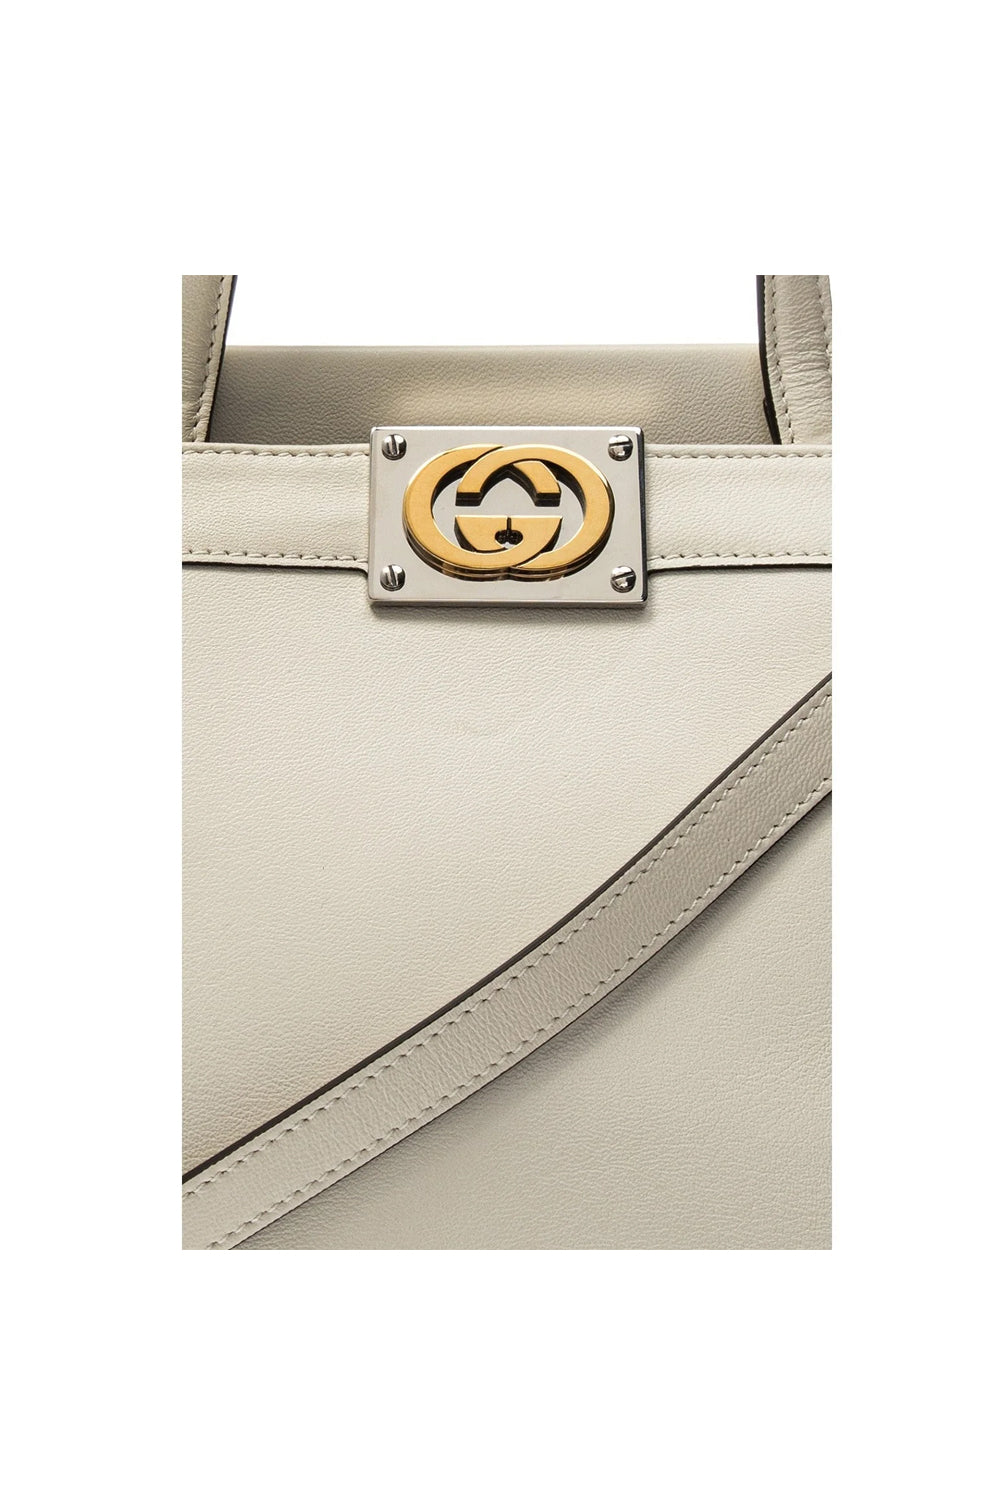 Gucci Matisse Mystic Leather GG Top Handle Bag